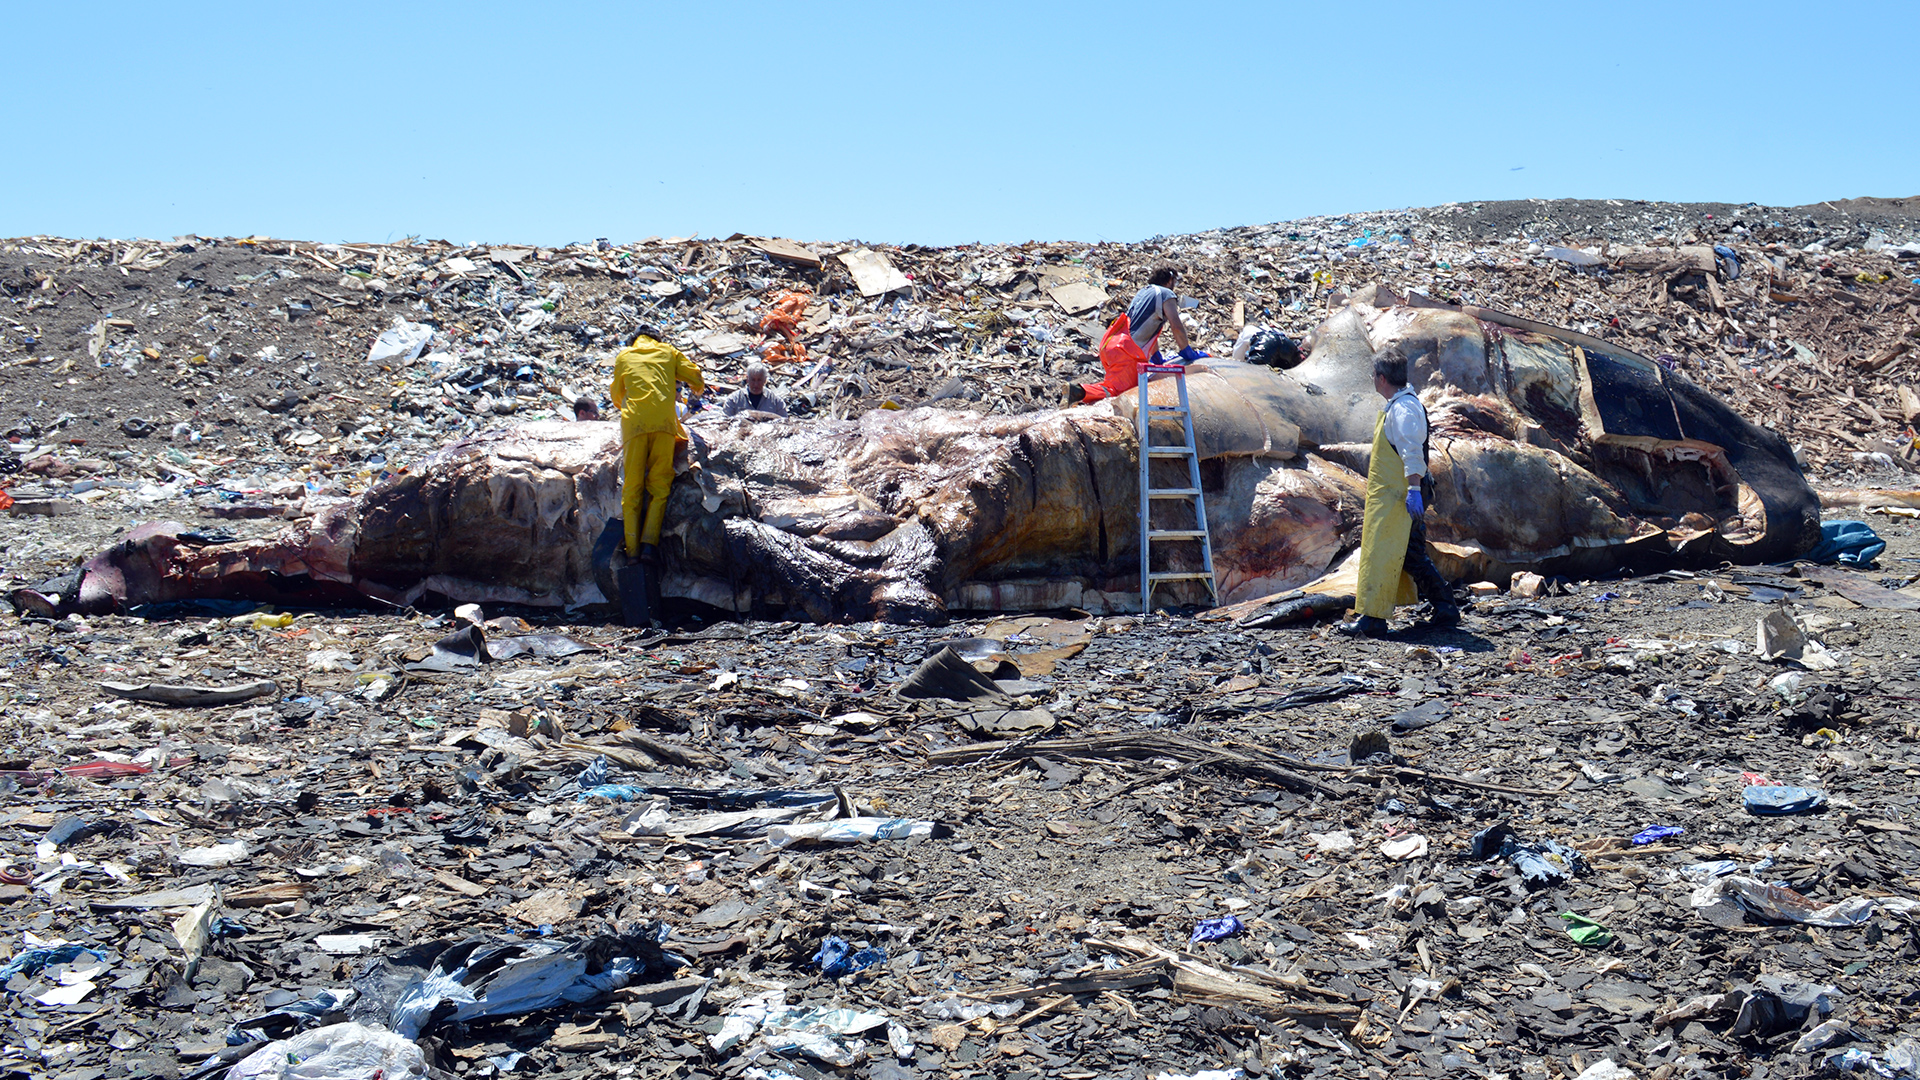 Three people flense a whale carcass at a landfill amidst heaps of garbage.